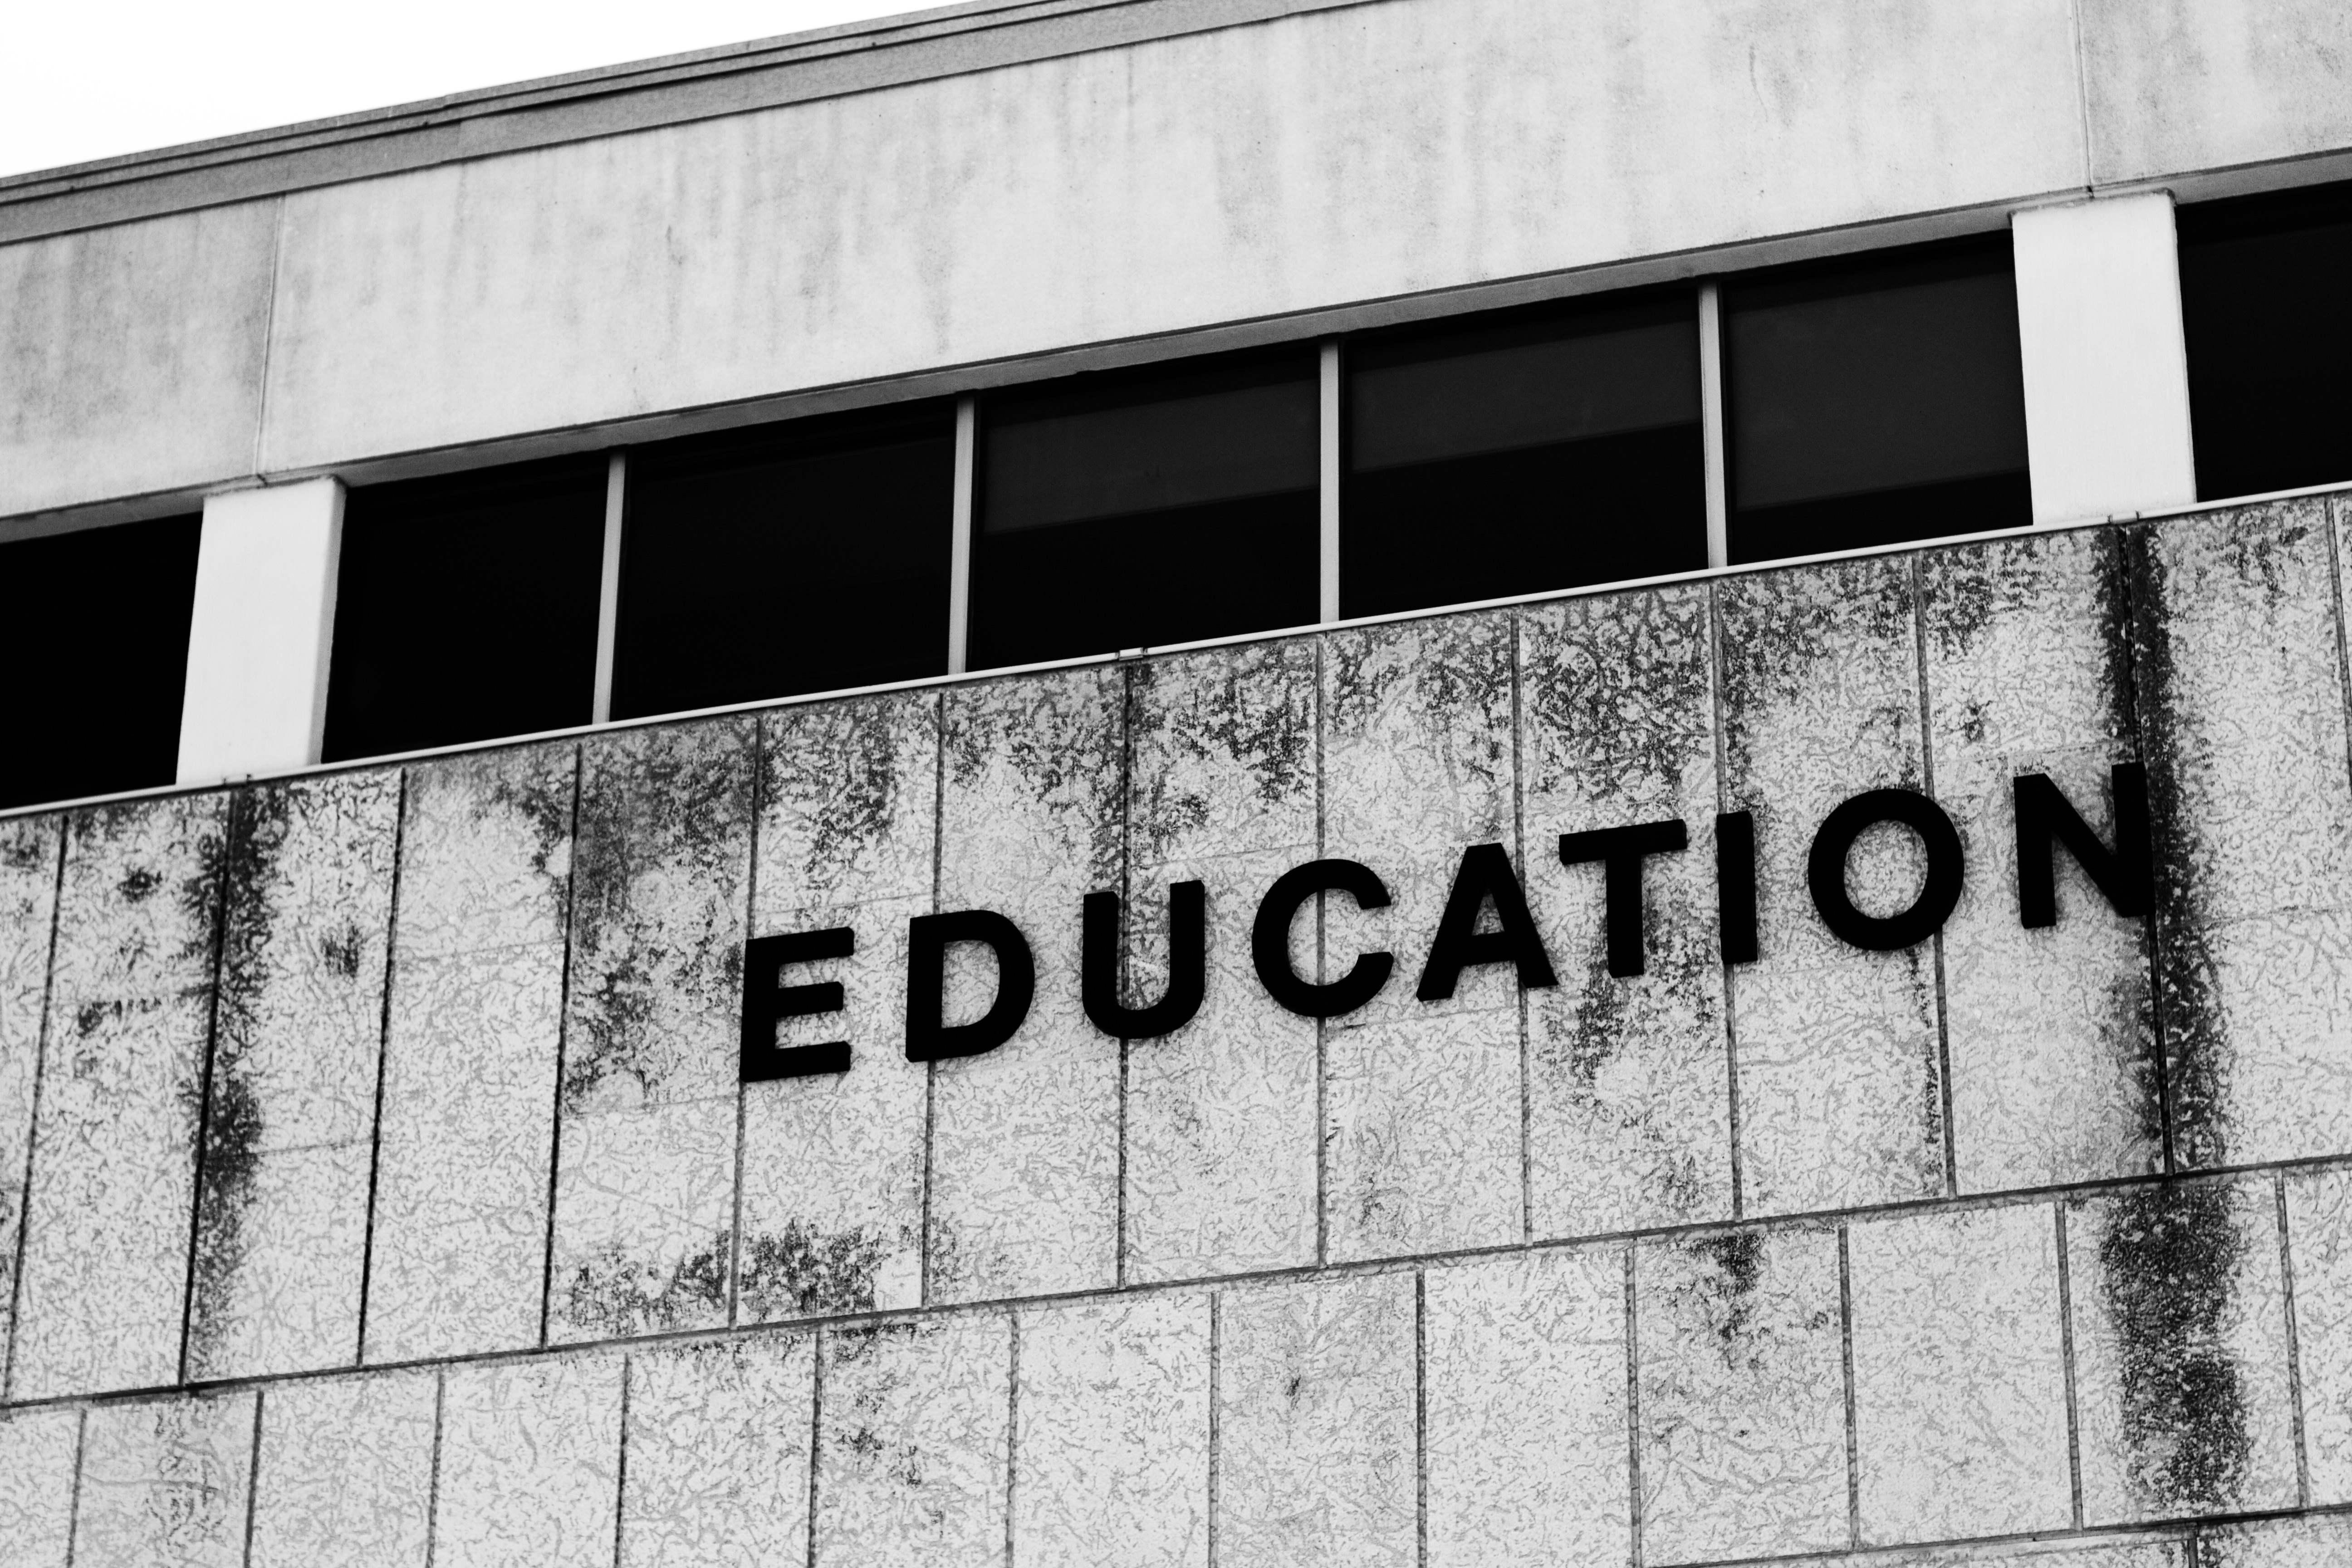 The word ‘EDUCATION’ written on the side of a dirty building. Photo by Alan Levine via Flickr (https://www.flickr.com/photos/cogdog/14207665792/)